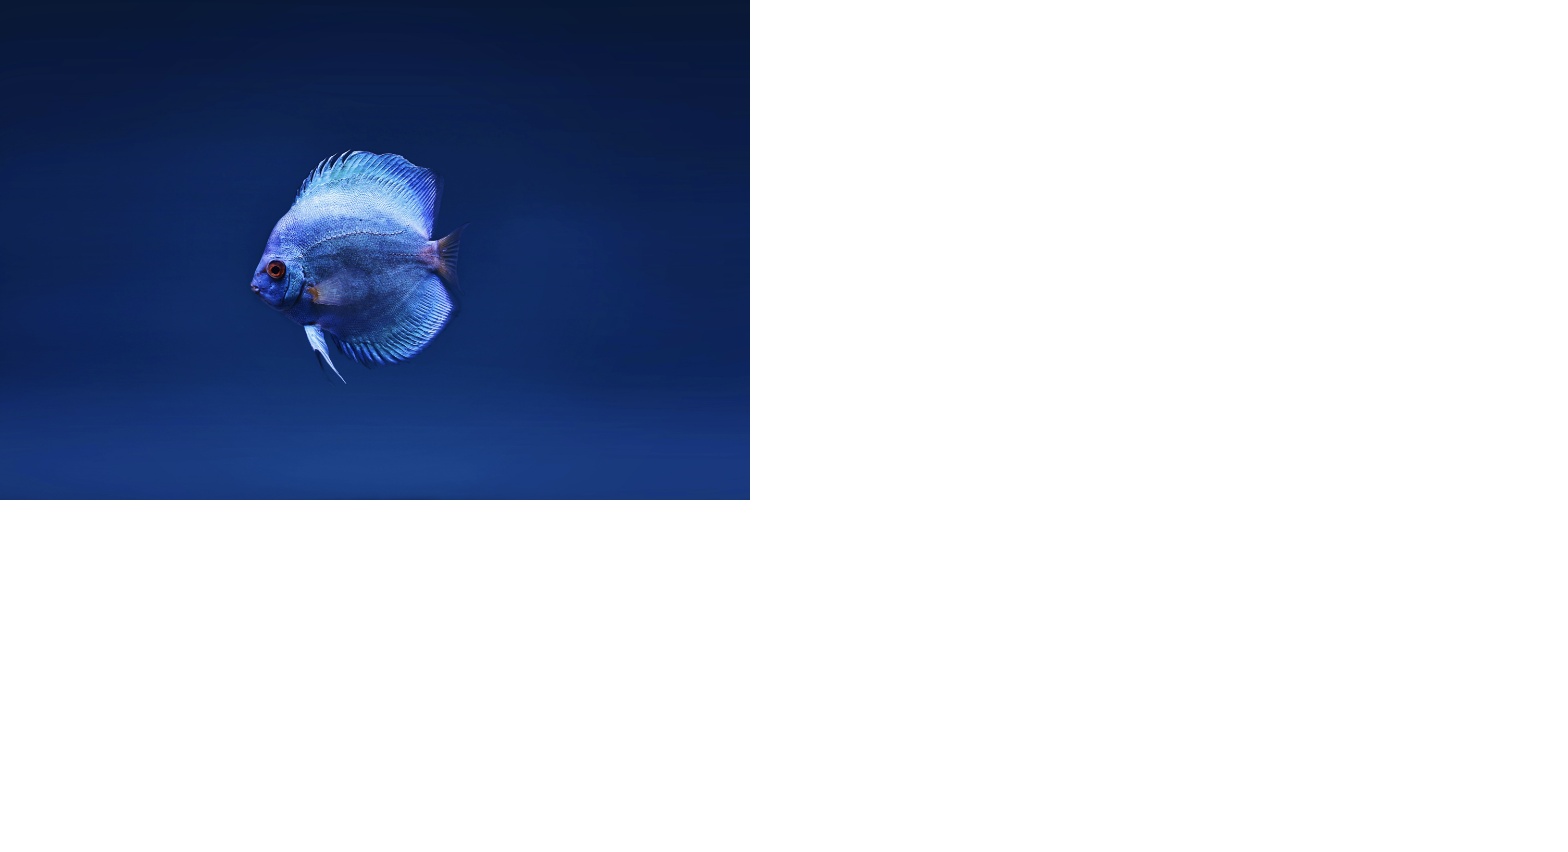 A blue fish image following the above css specifications